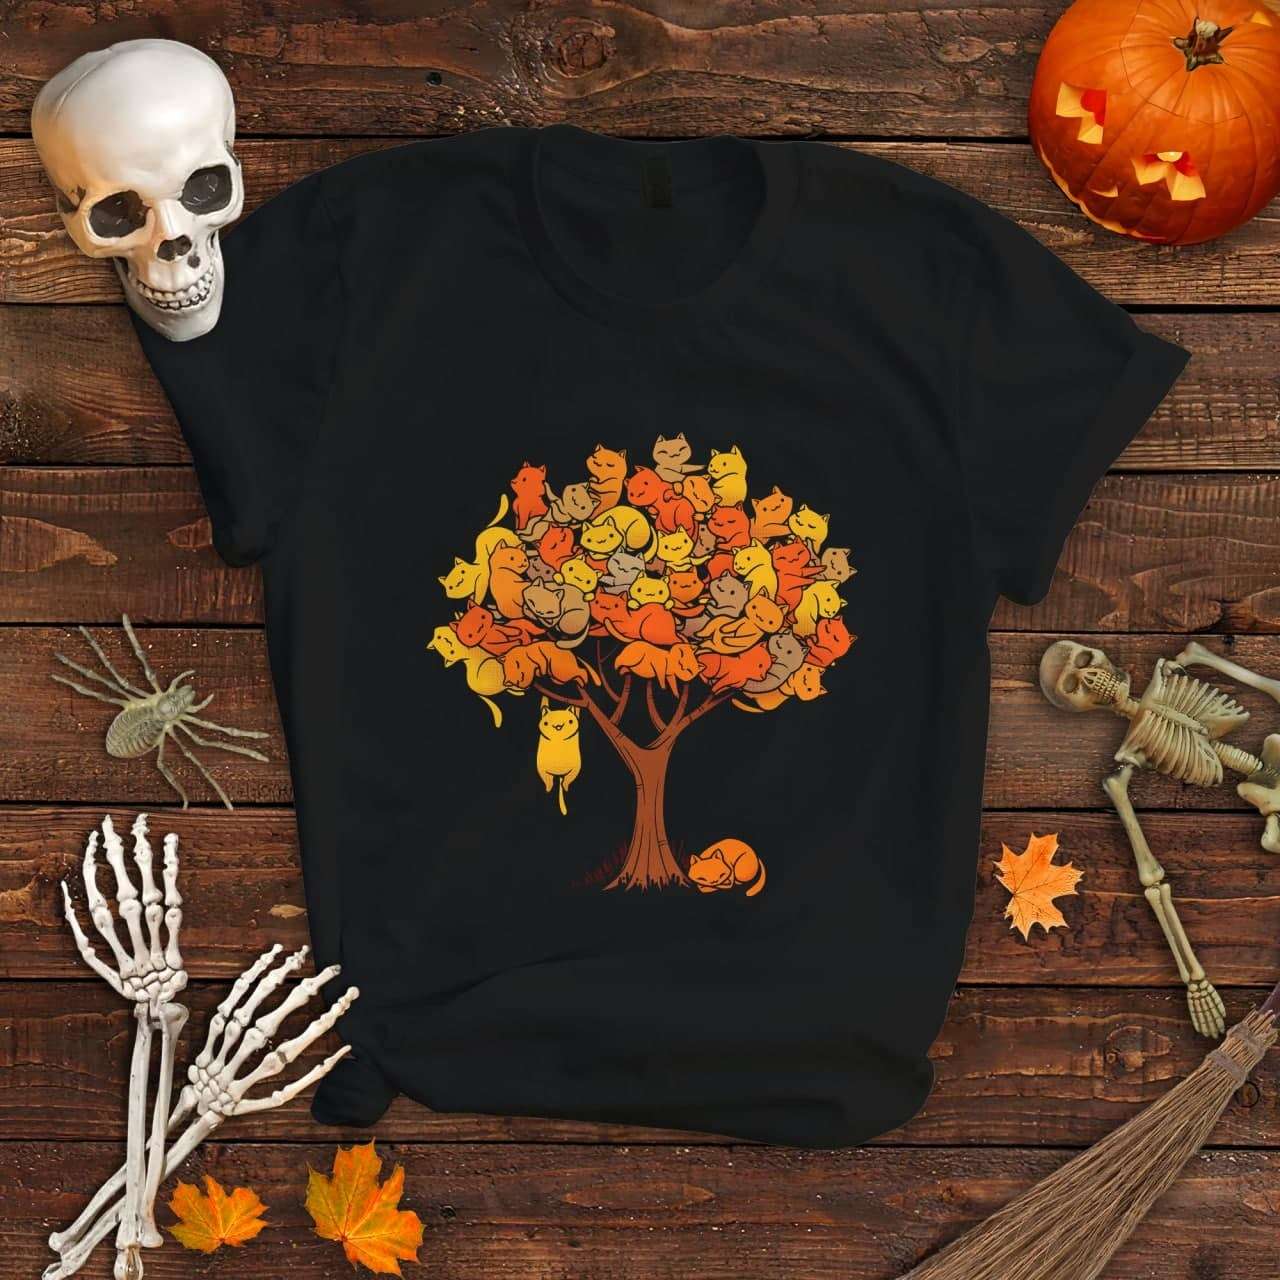 Tree of cat - Cat climbing on the tree, T-shirt for cat lover